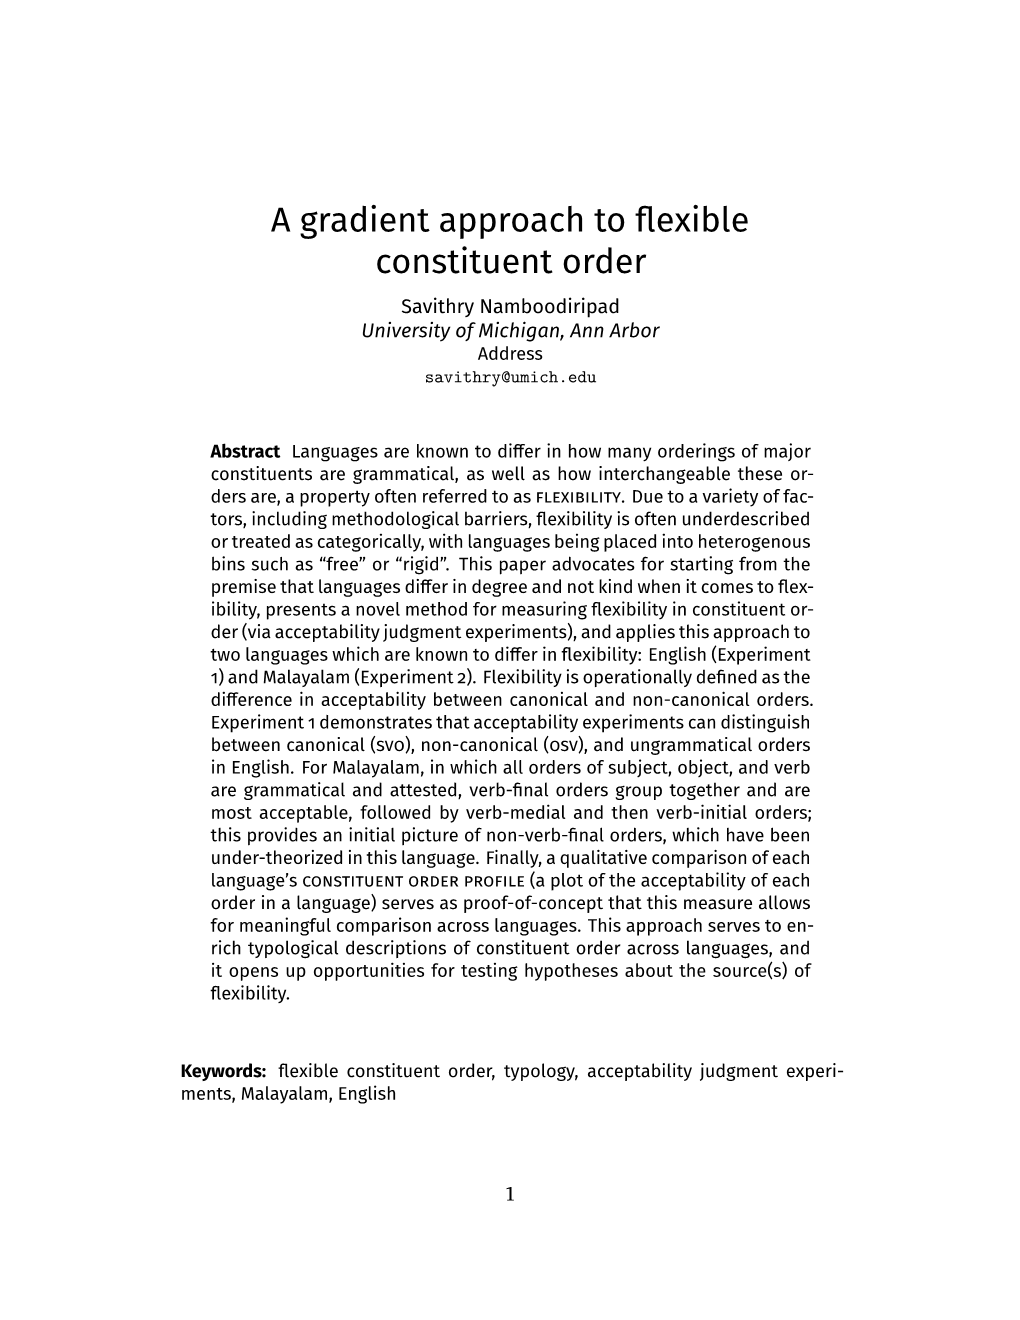 A Gradient Approach to Cross-Linguistic Variation in Flexible